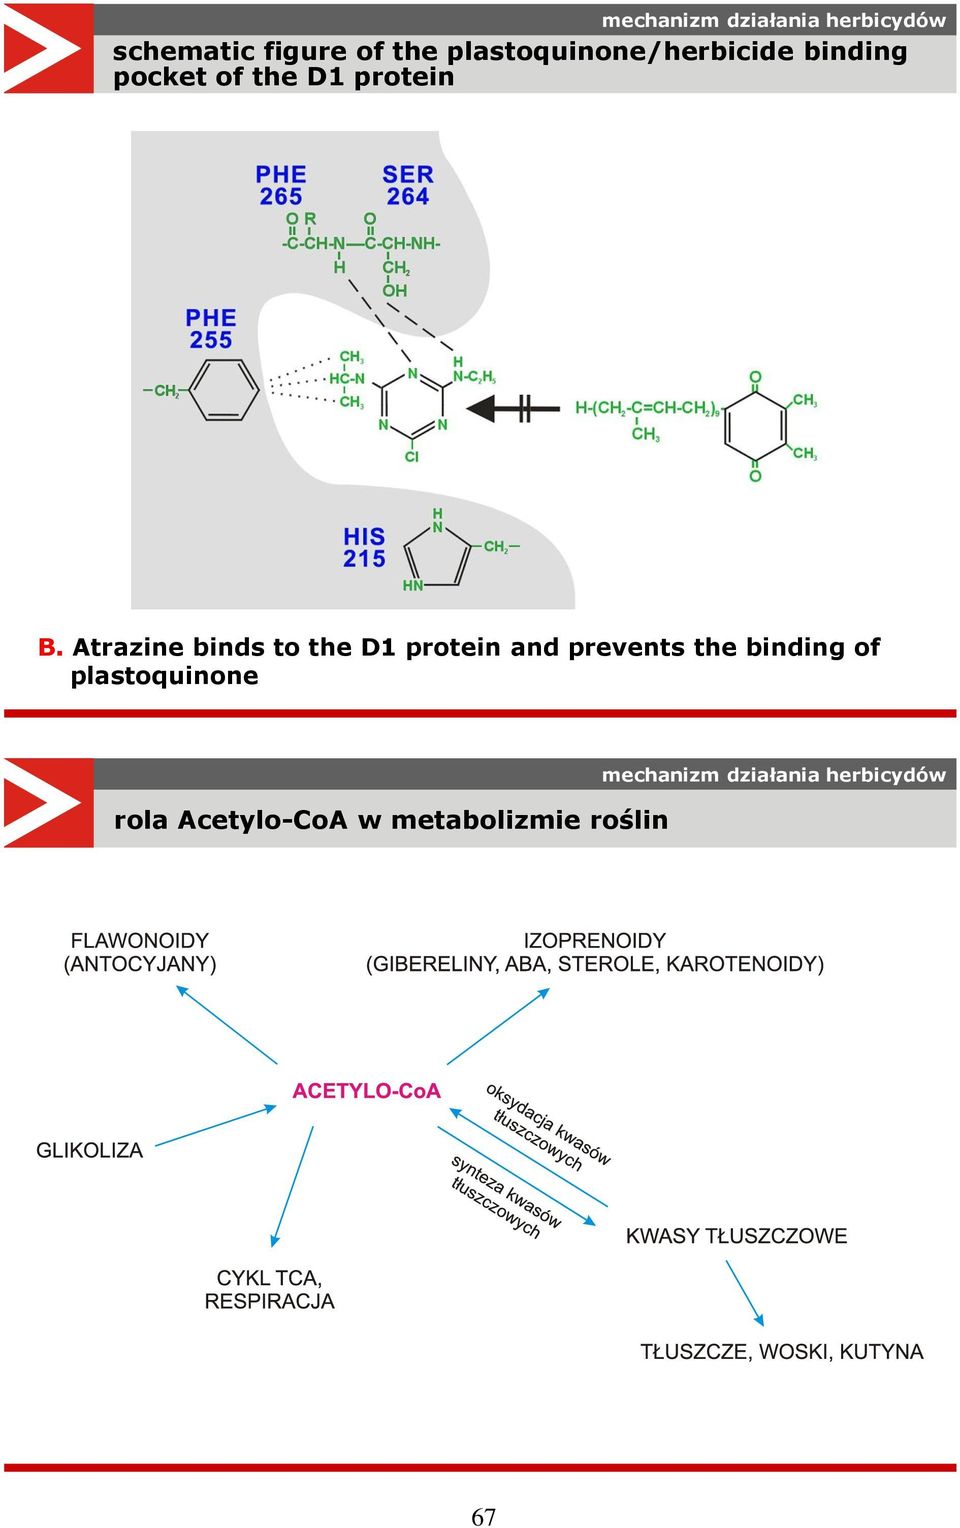 Atrazine binds to the D1 protein and prevents the